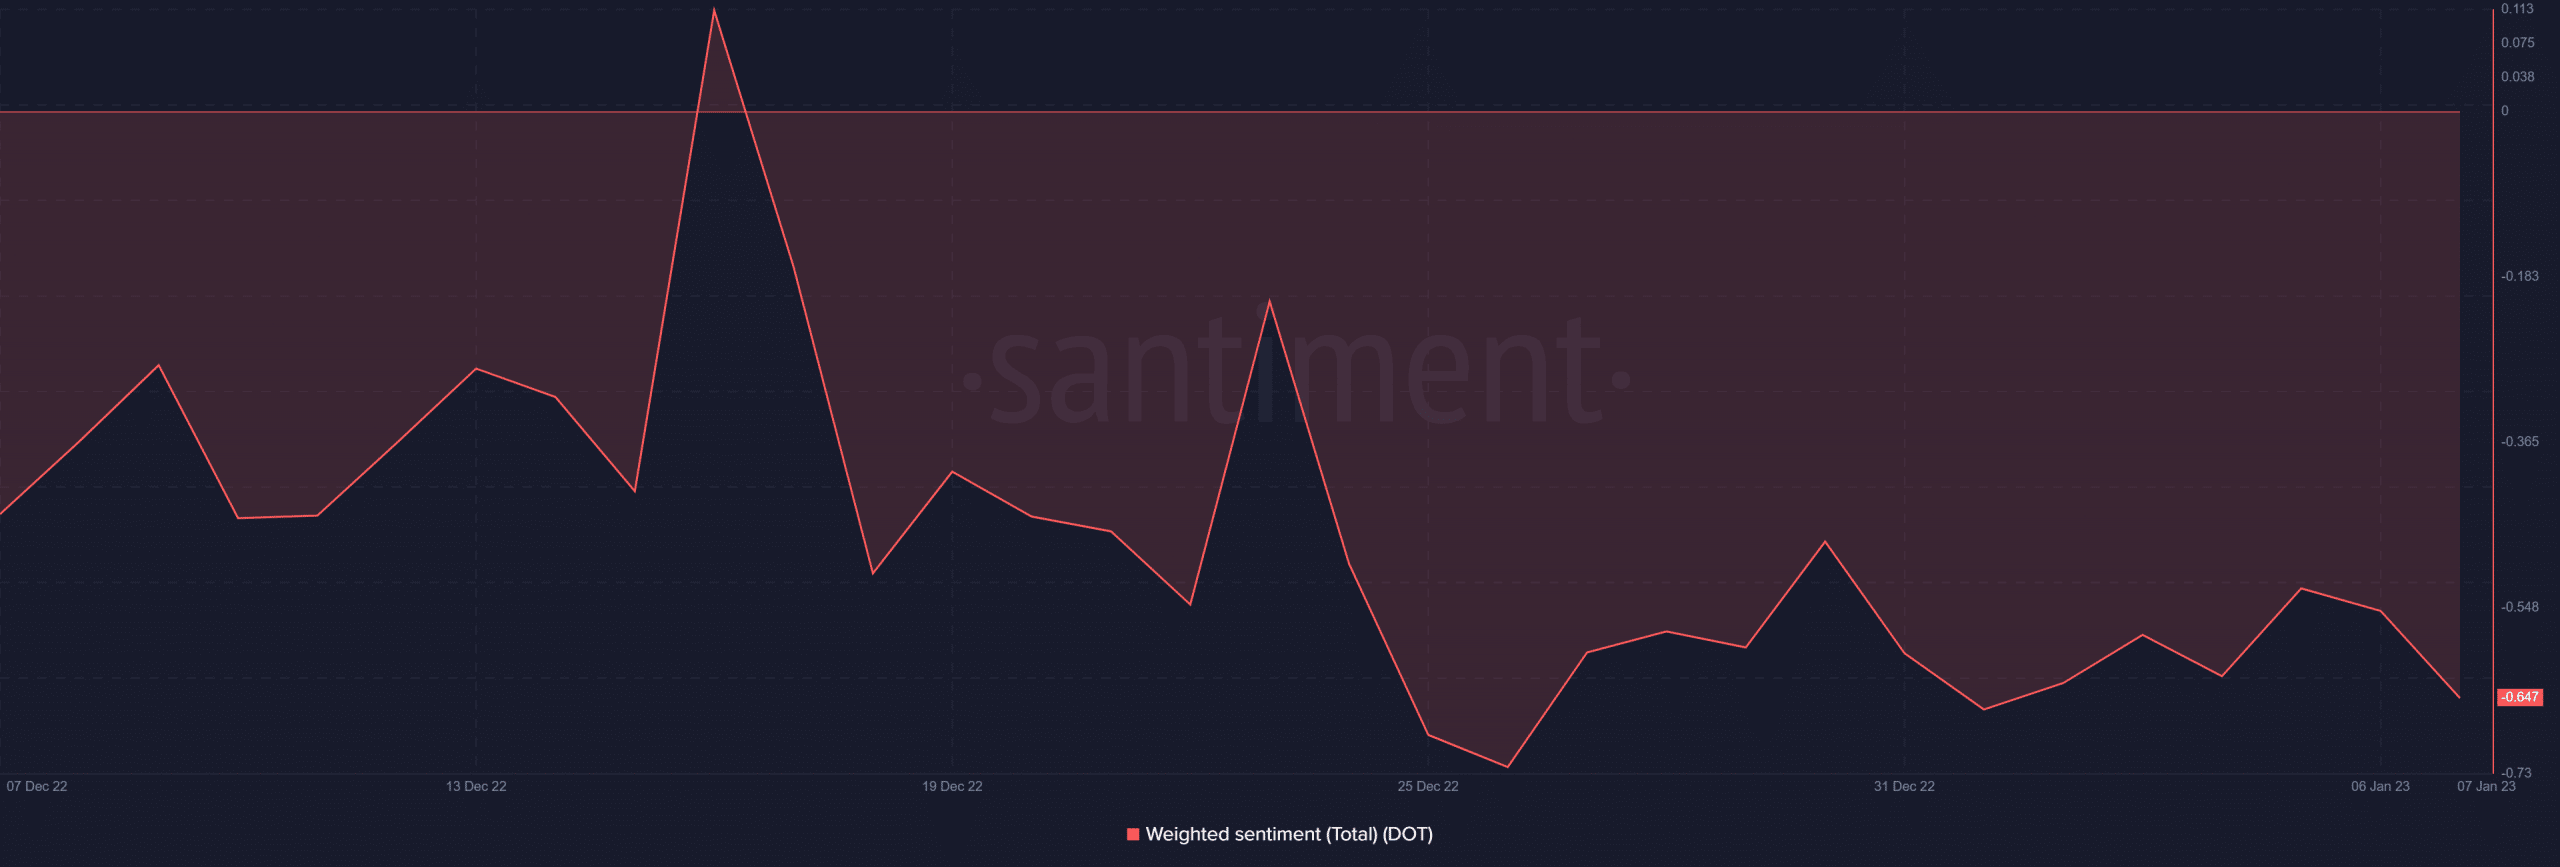 Polkadot weighted sentiment